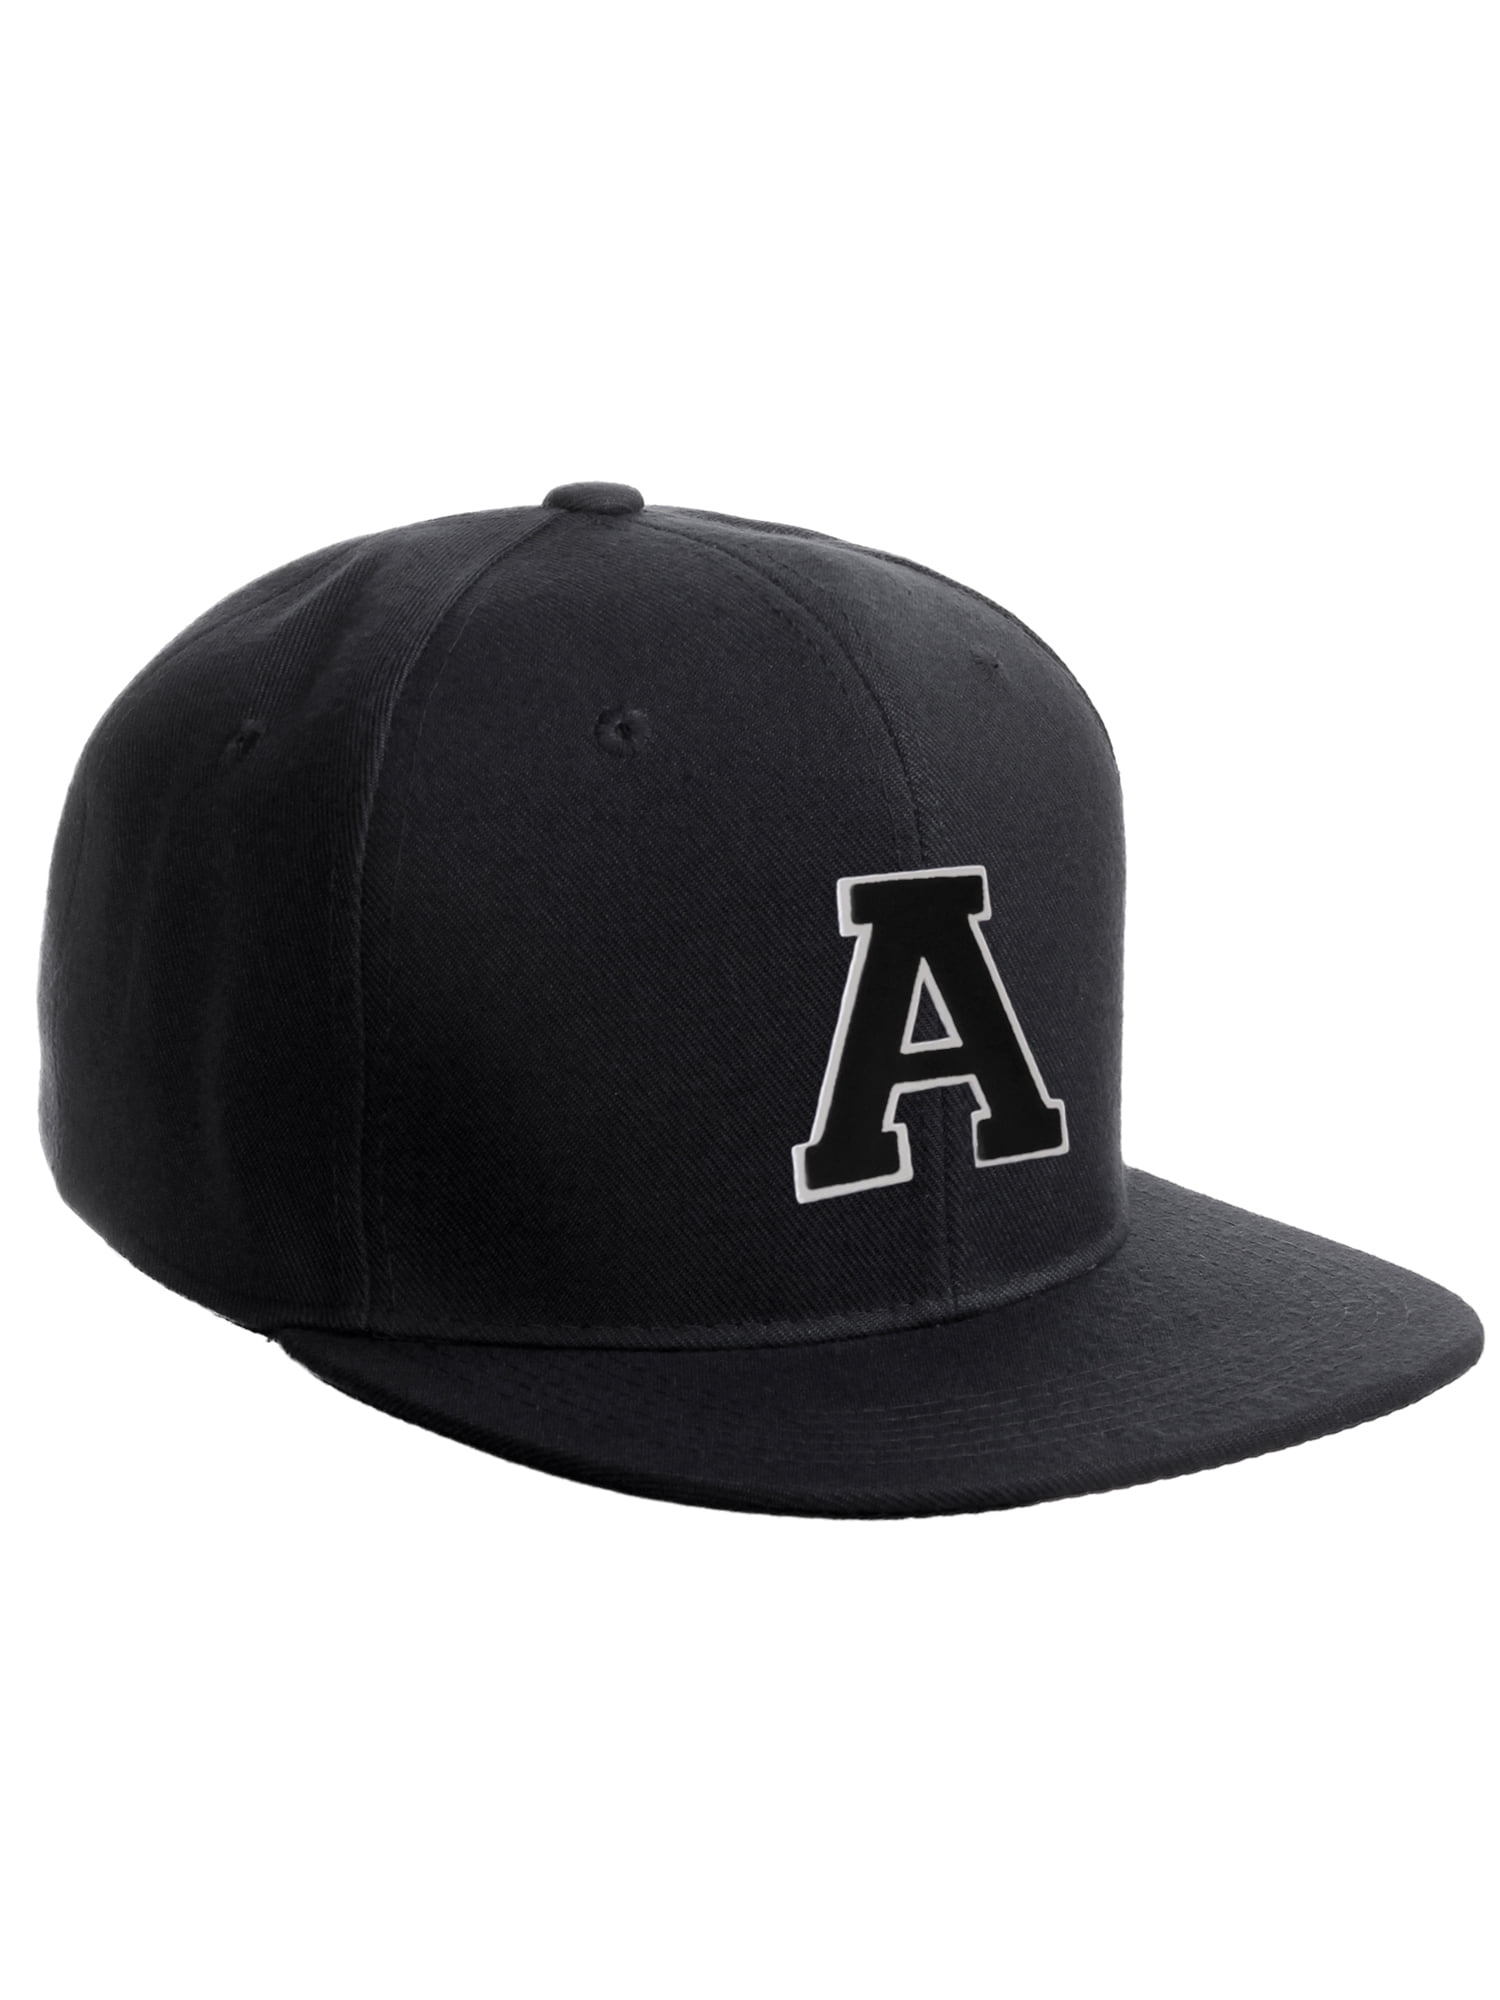 Black Cap White Black Classic Snapback Hat Custom A to Z Initial Raised Letters 